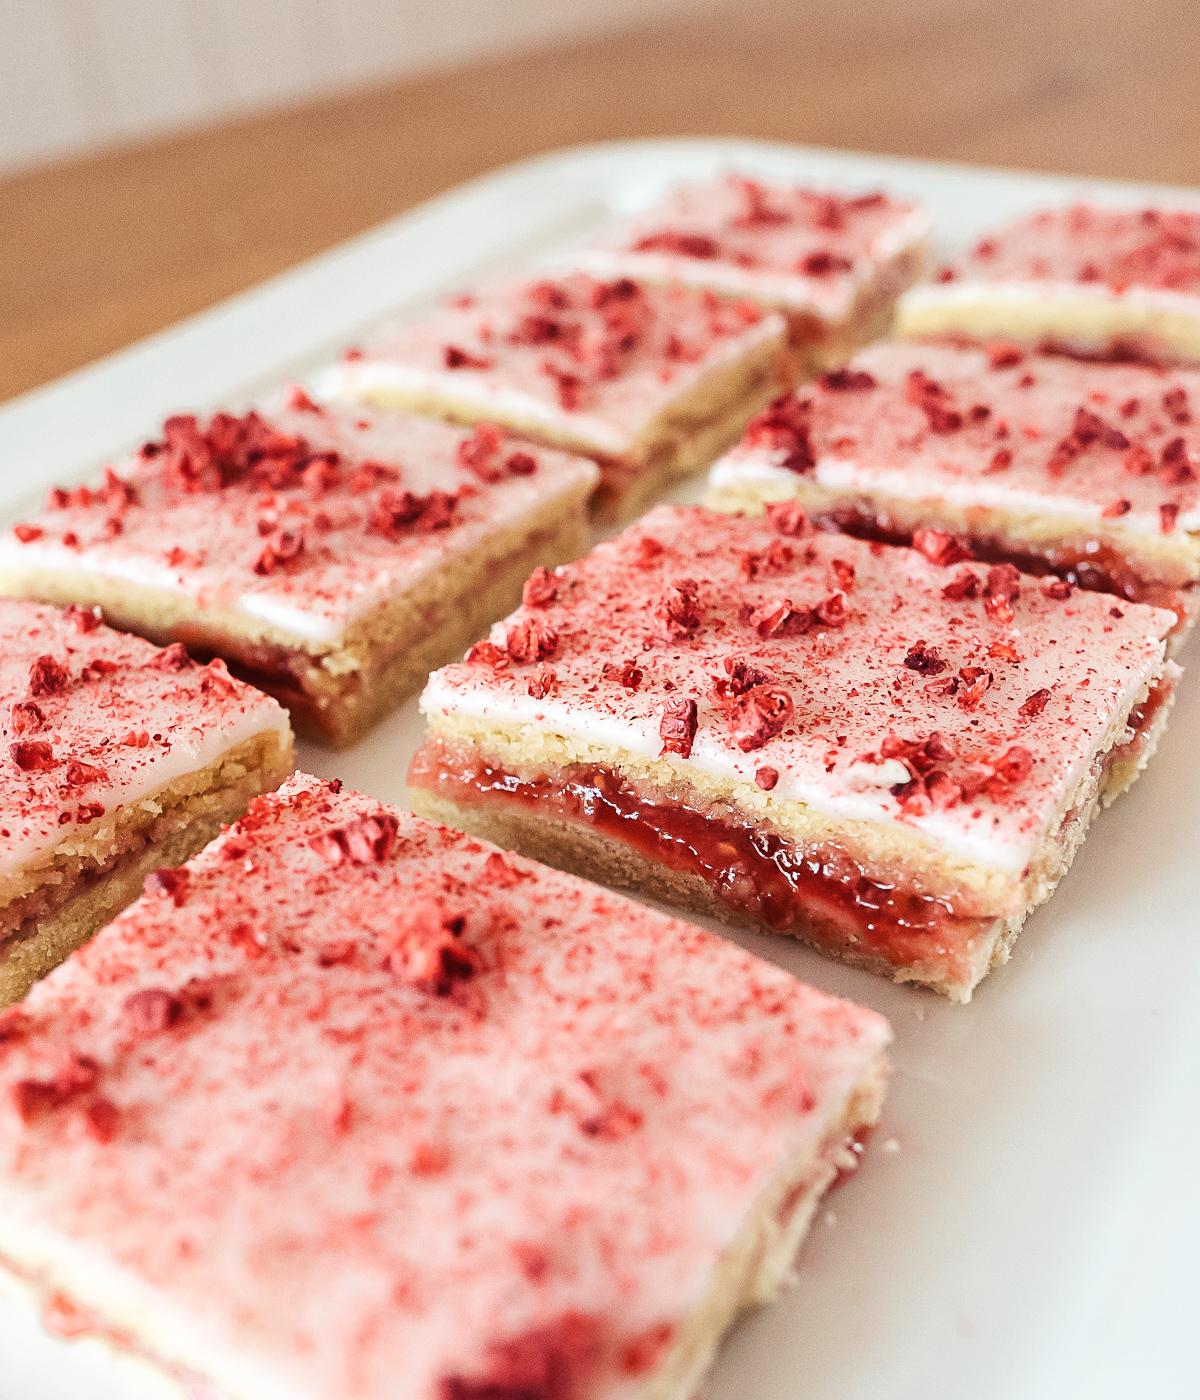 hindbærsnitter (Danish raspberry slices) cut into squares